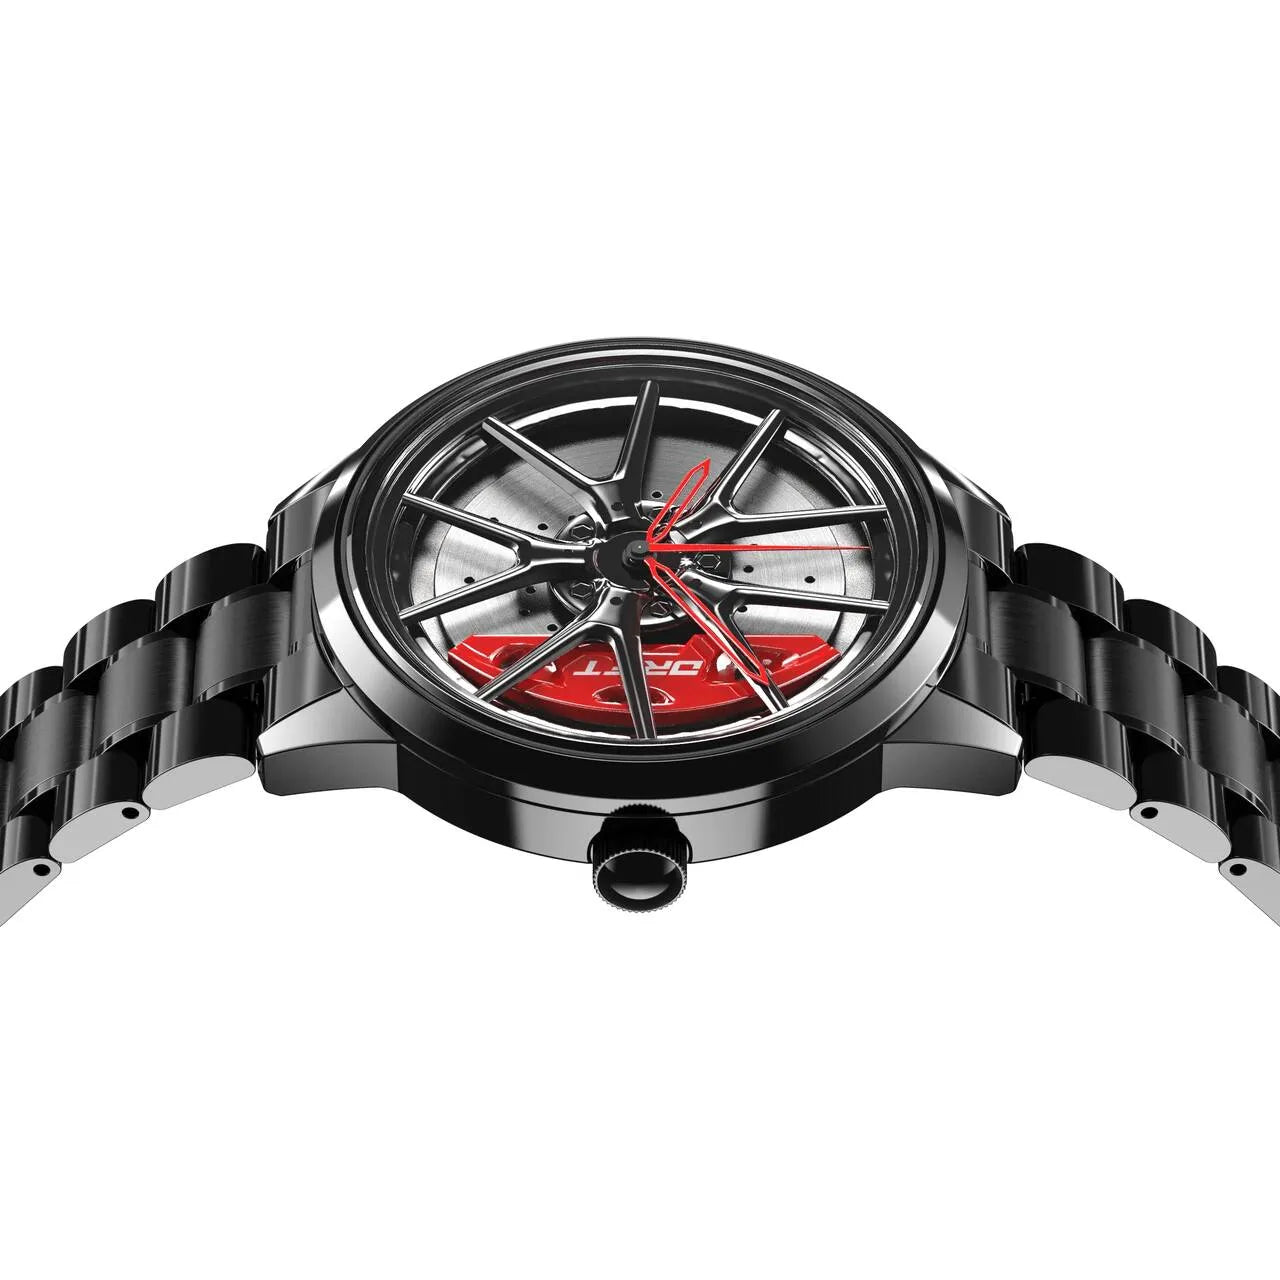 Illuminate your style with our bold red Nitro Rim Watch! Designed by a German startup, these precision watches are made for motorsport, tuning, and auto enthusiasts. Get set to ignite your passion! #id_46744364253514